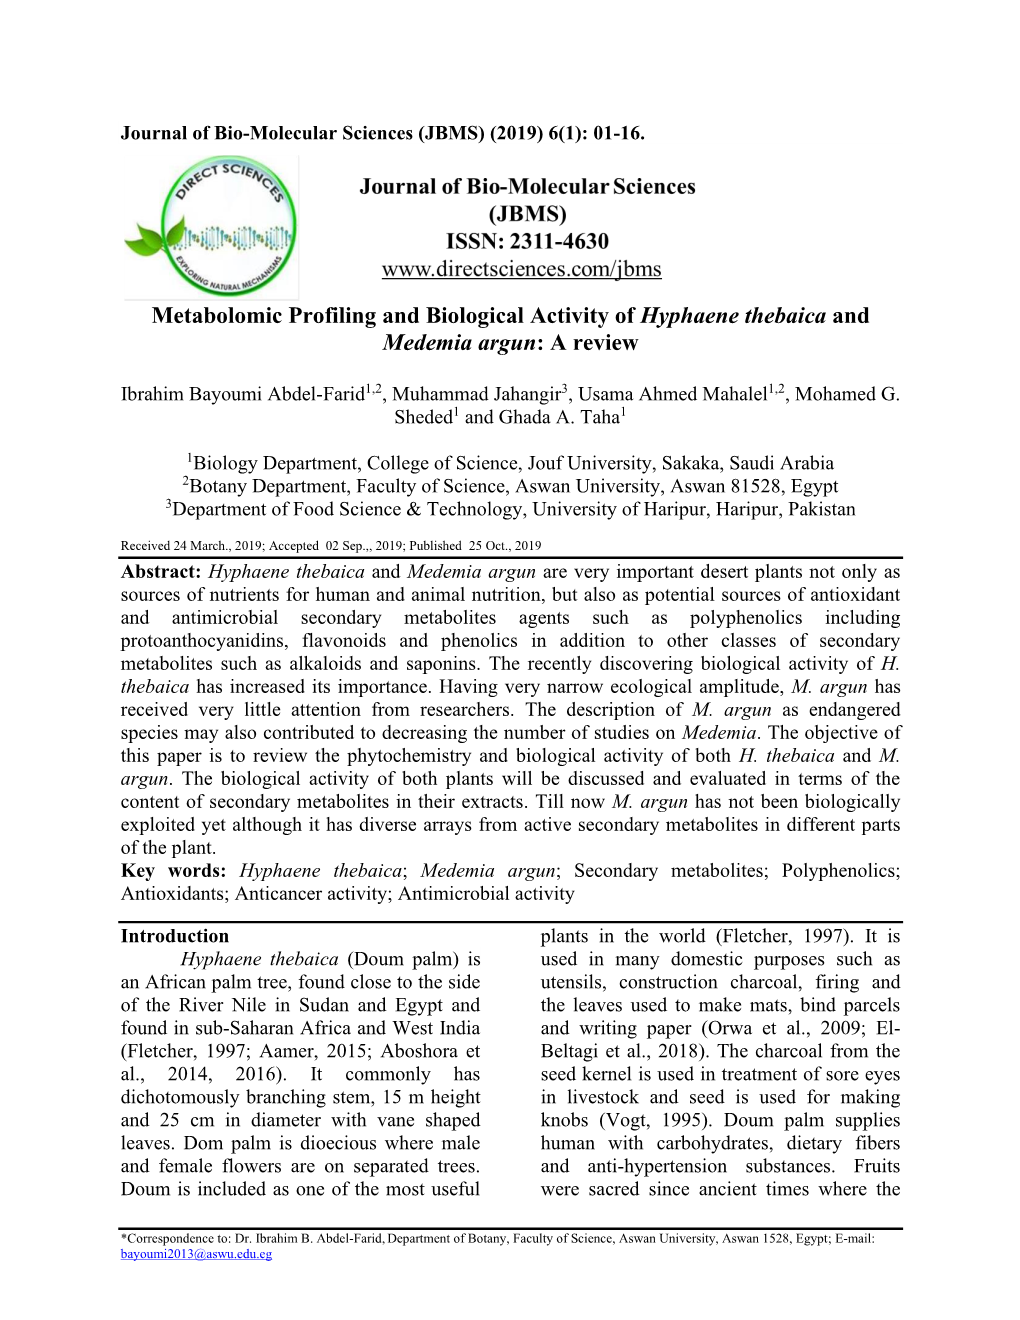 Metabolomic Profiling and Biological Activity of Hyphaene Thebaica and Medemia Argun: a Review